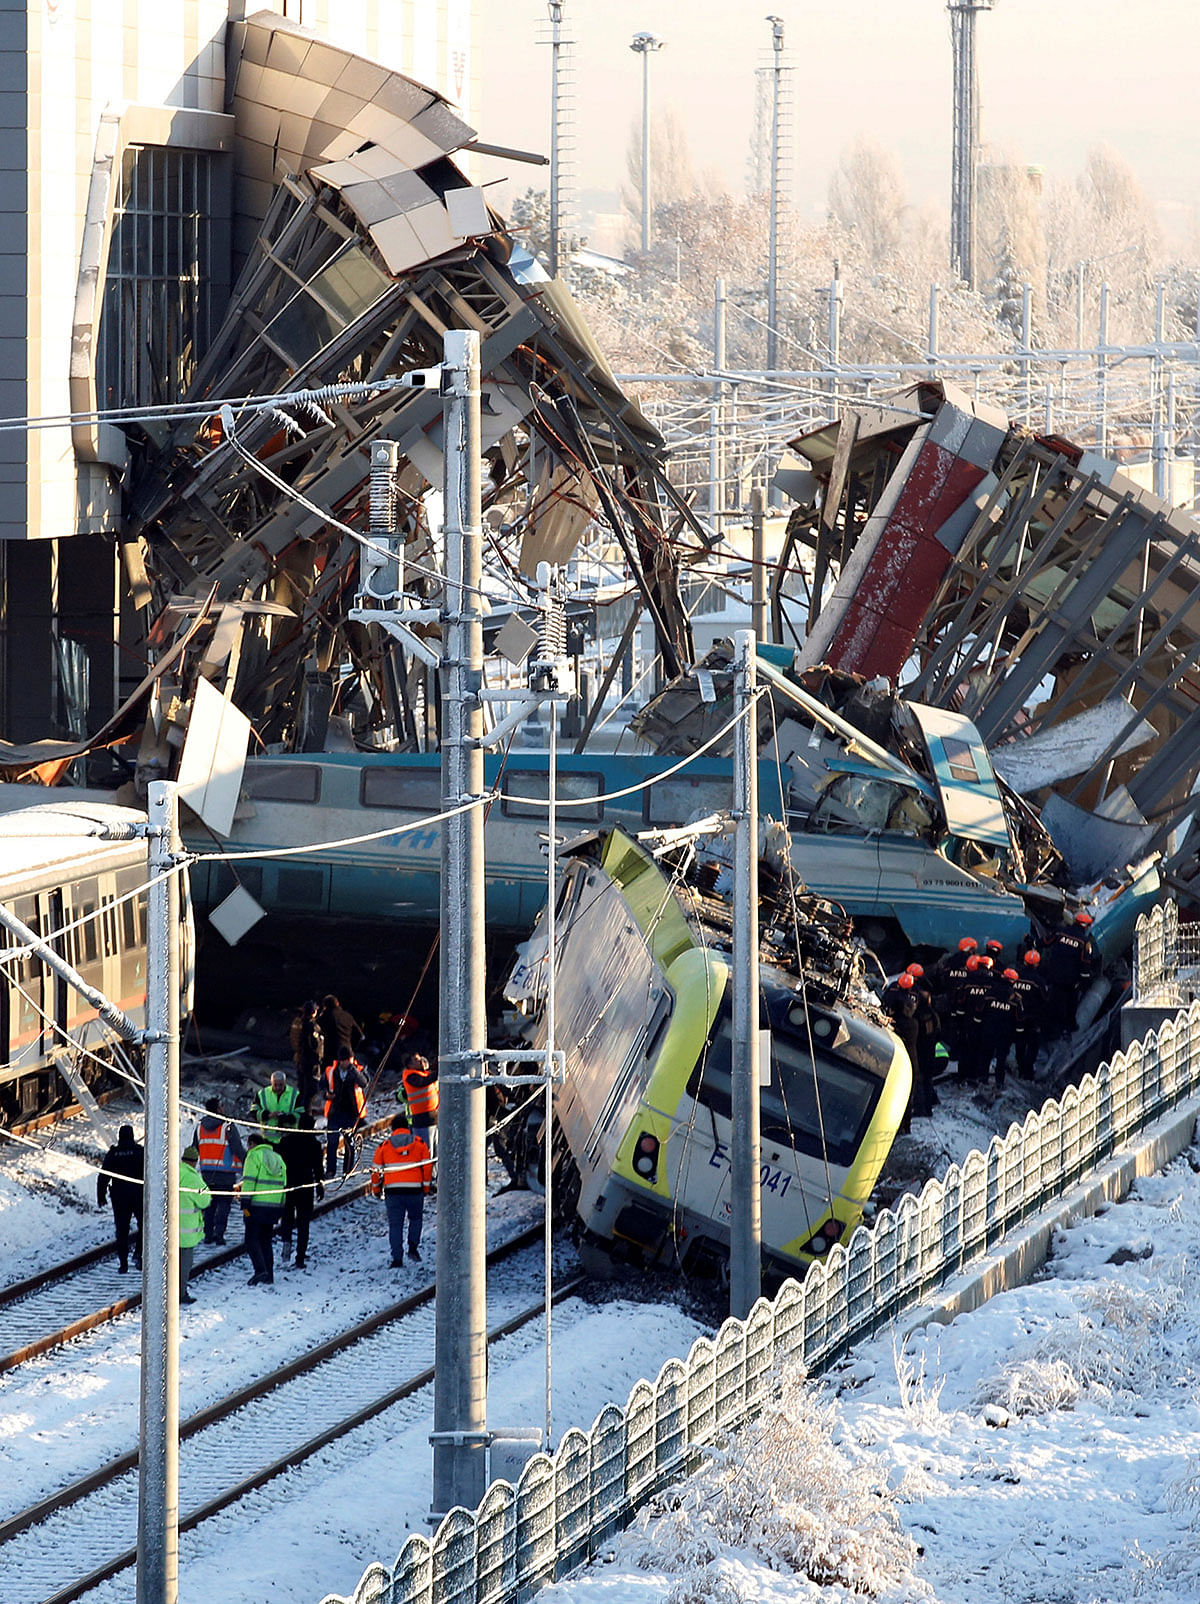 Rescue workers search at the wreckage after a high speed train crash in Ankara, Turkey on 13 December 2018. Photo: Reuters